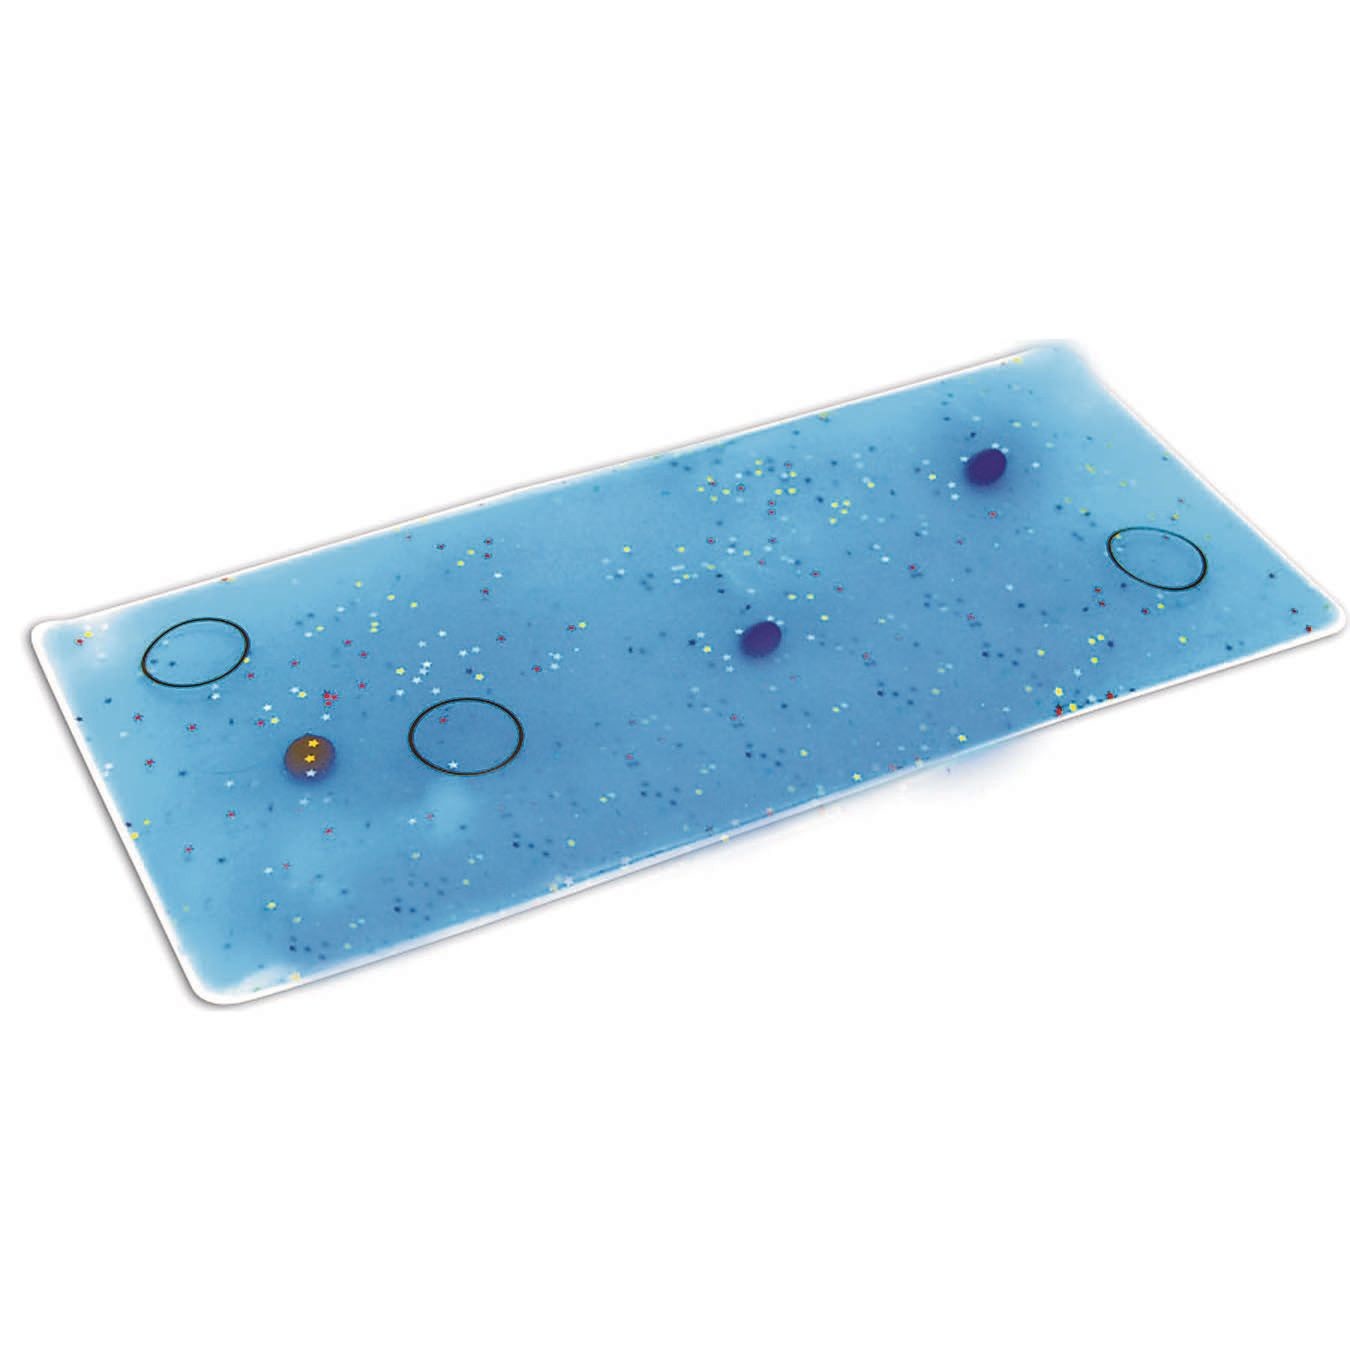 Buy Sensory Stimulation Gel Pad with Marbles at S&S Worldwide